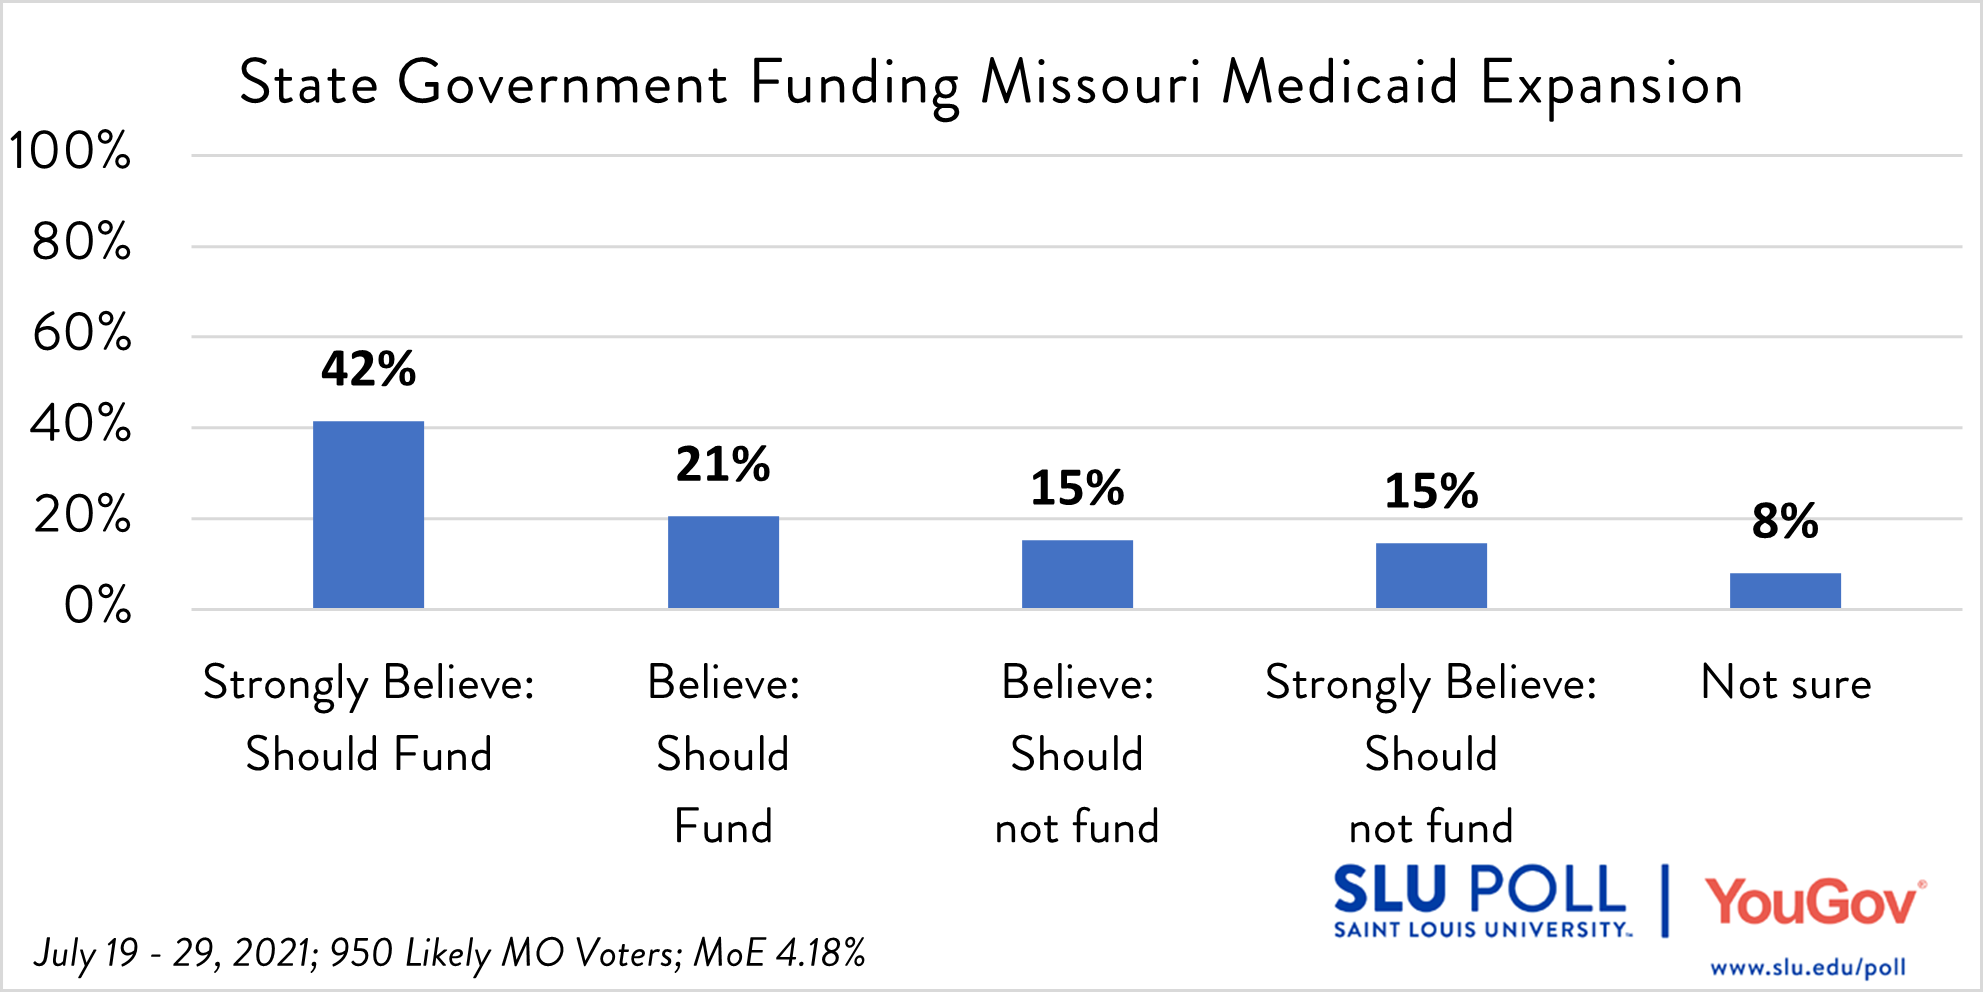 In 2020 Missouri voters voted to approve expanding Medicaid to thousands more low-income Missouri adults, but the State of Missouri has refused to fund the program. How strongly do you feel about Missouri funding Medicaid expansion? - Strongly believe Missouri should fund Medicaid expansion: 41%   - Believe Missouri should fund Medicaid expansion: 21% - Believe Missouri should not fund Medicaid expansion: 15% - Strongly believe Missouri should not fund Medicaid expansion: 15%   - Not sure: 8%